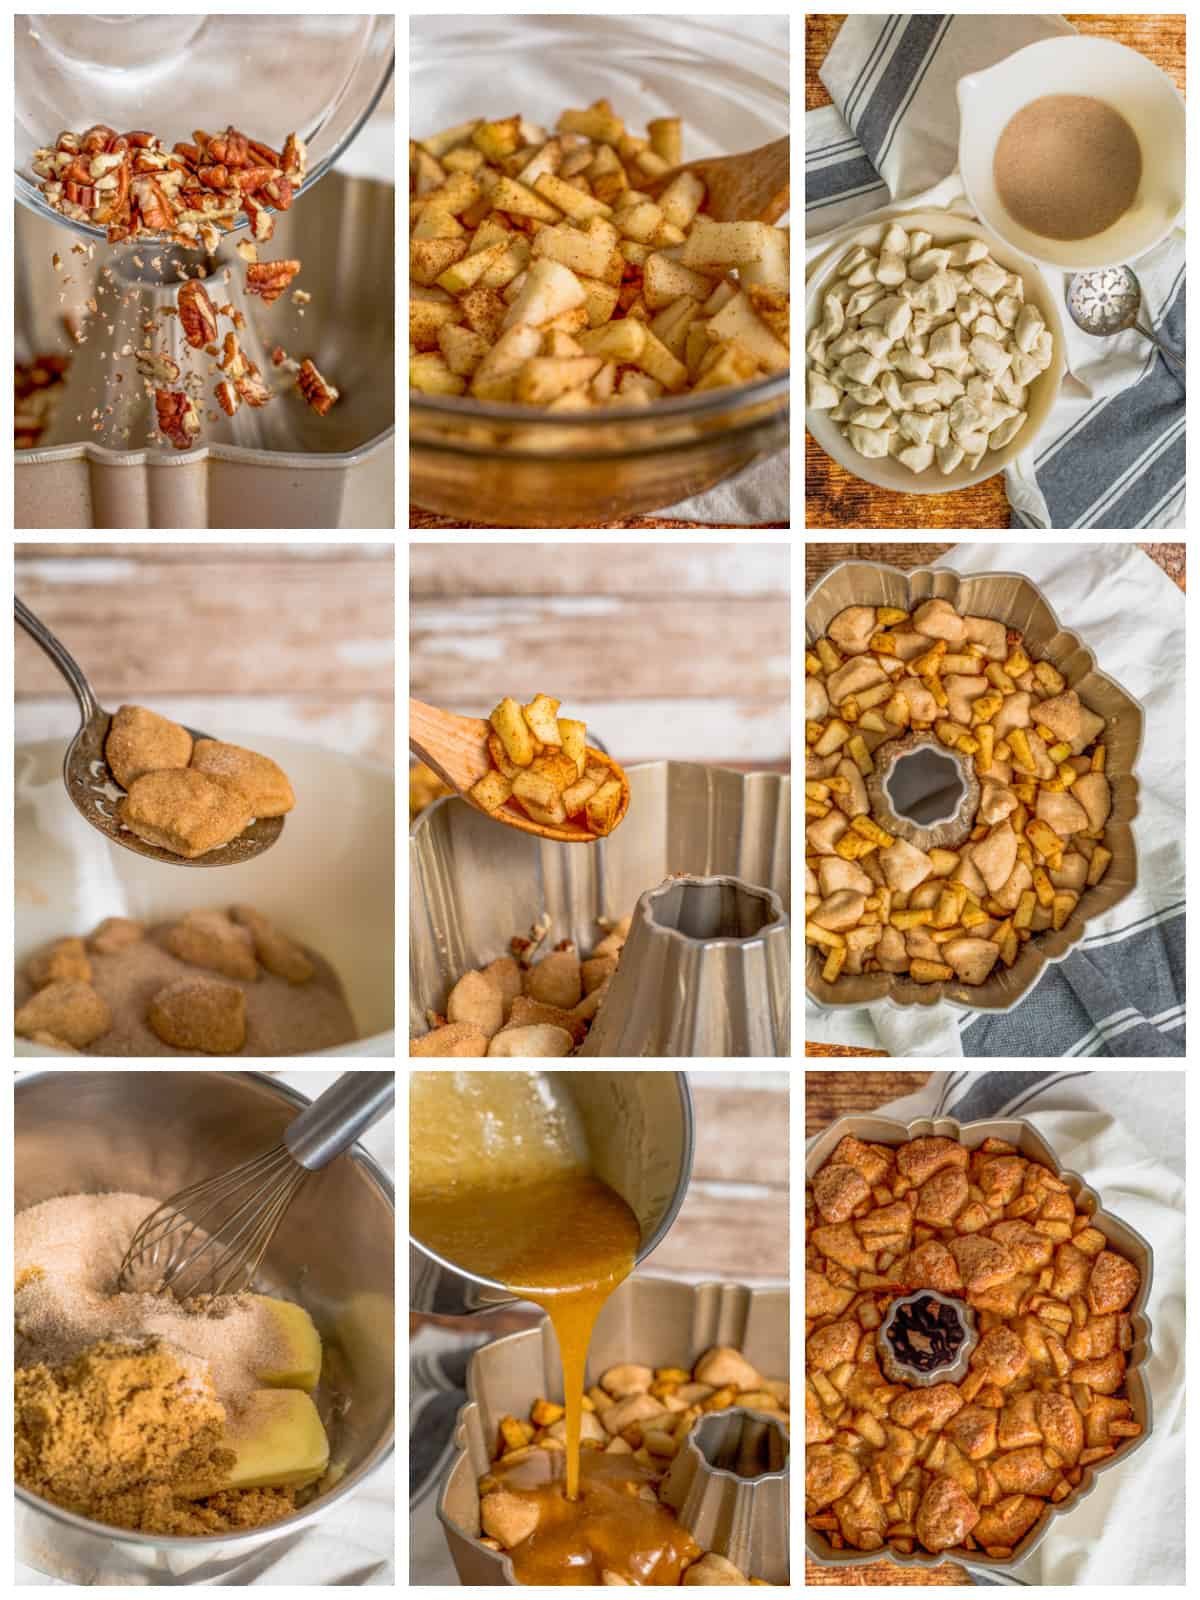 Step by step photos on how to make Apple Monkey Bread